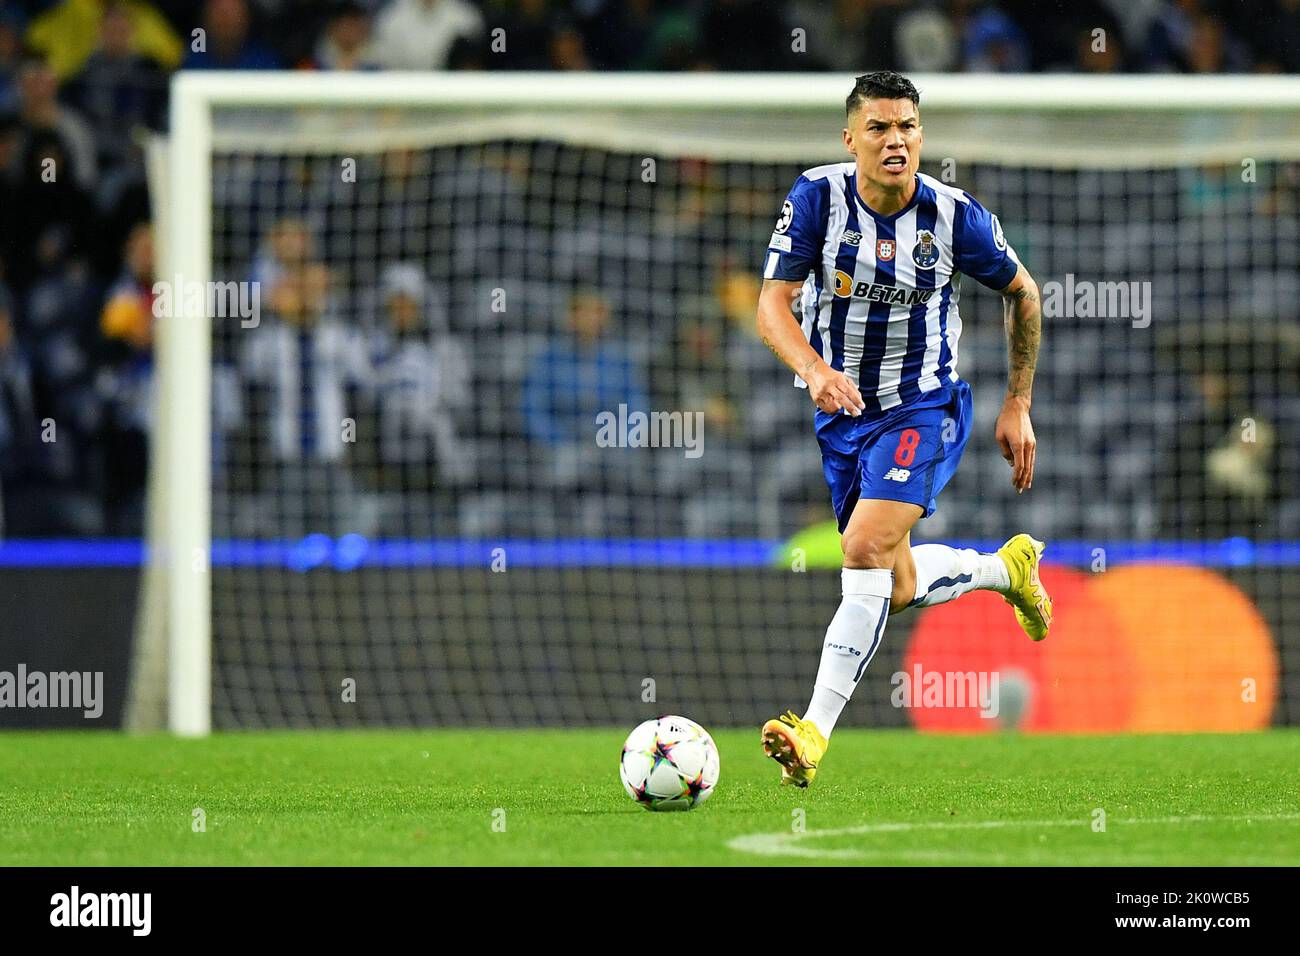 Harbor, Portugal. 13th Sep, 2022. Mateus Uribe do Porto, during the match between Porto and Club Brugge, for the 2nd round of Group B of the UEFA Champions League 2022/2023 at Estadio do Dragao this Tuesday, 13. 30761 (Daniel Castro/SPP) Credit: SPP Sport Press Photo. /Alamy Live News Stock Photo